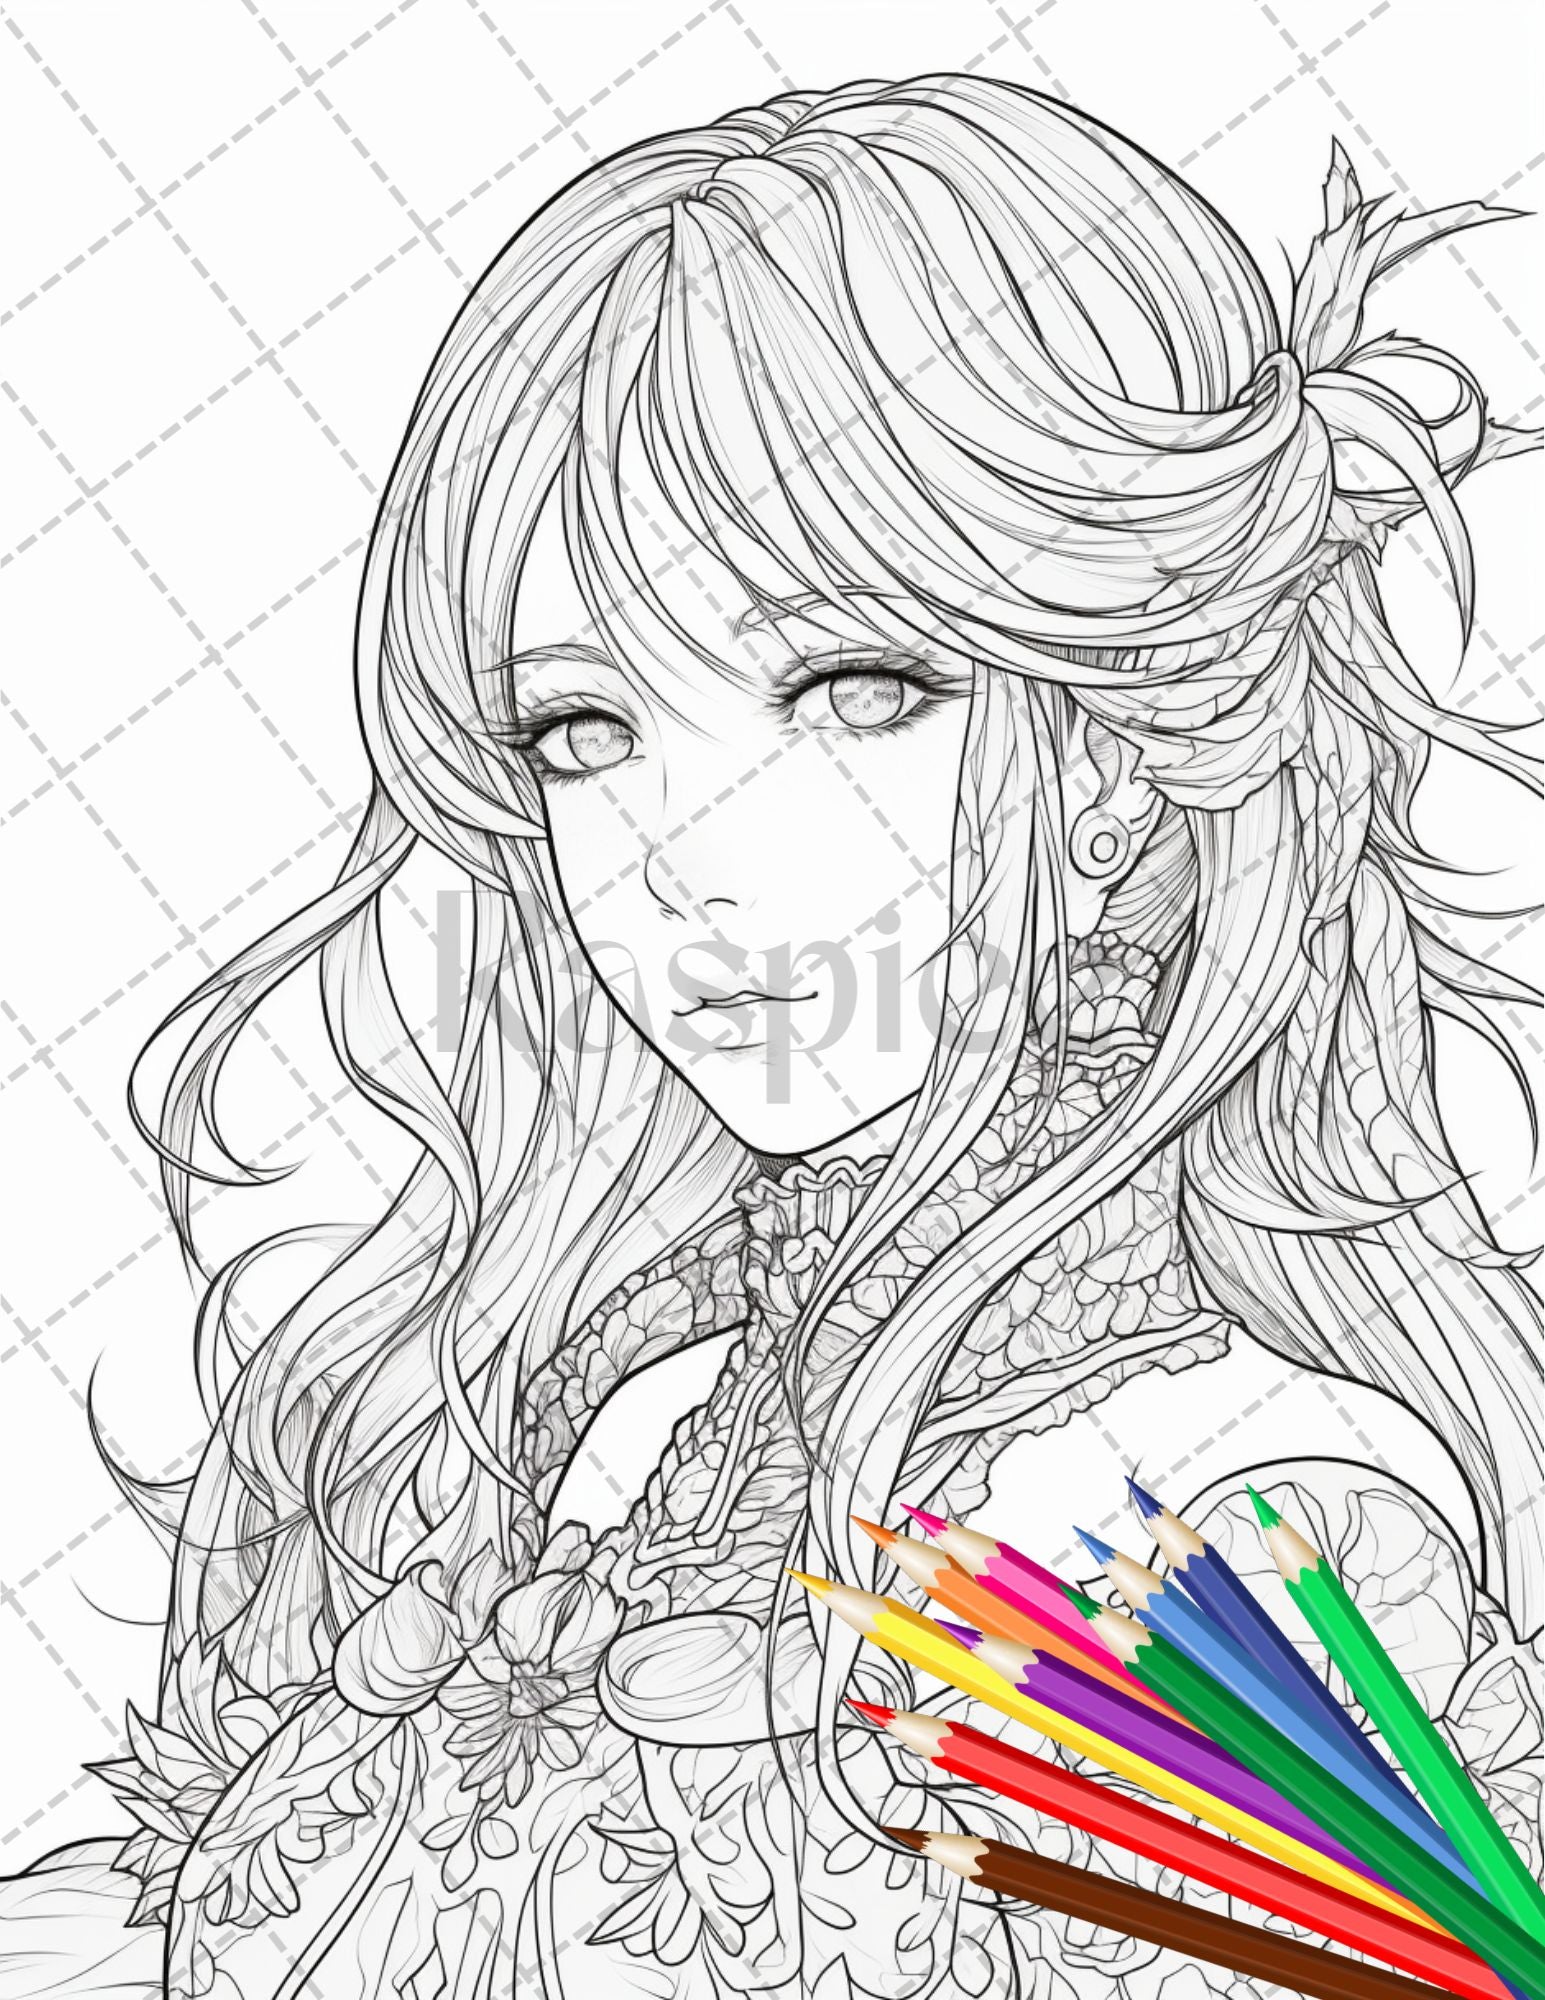 Anime fairy girl printable coloring pages for adults cute fairy gr â coloring